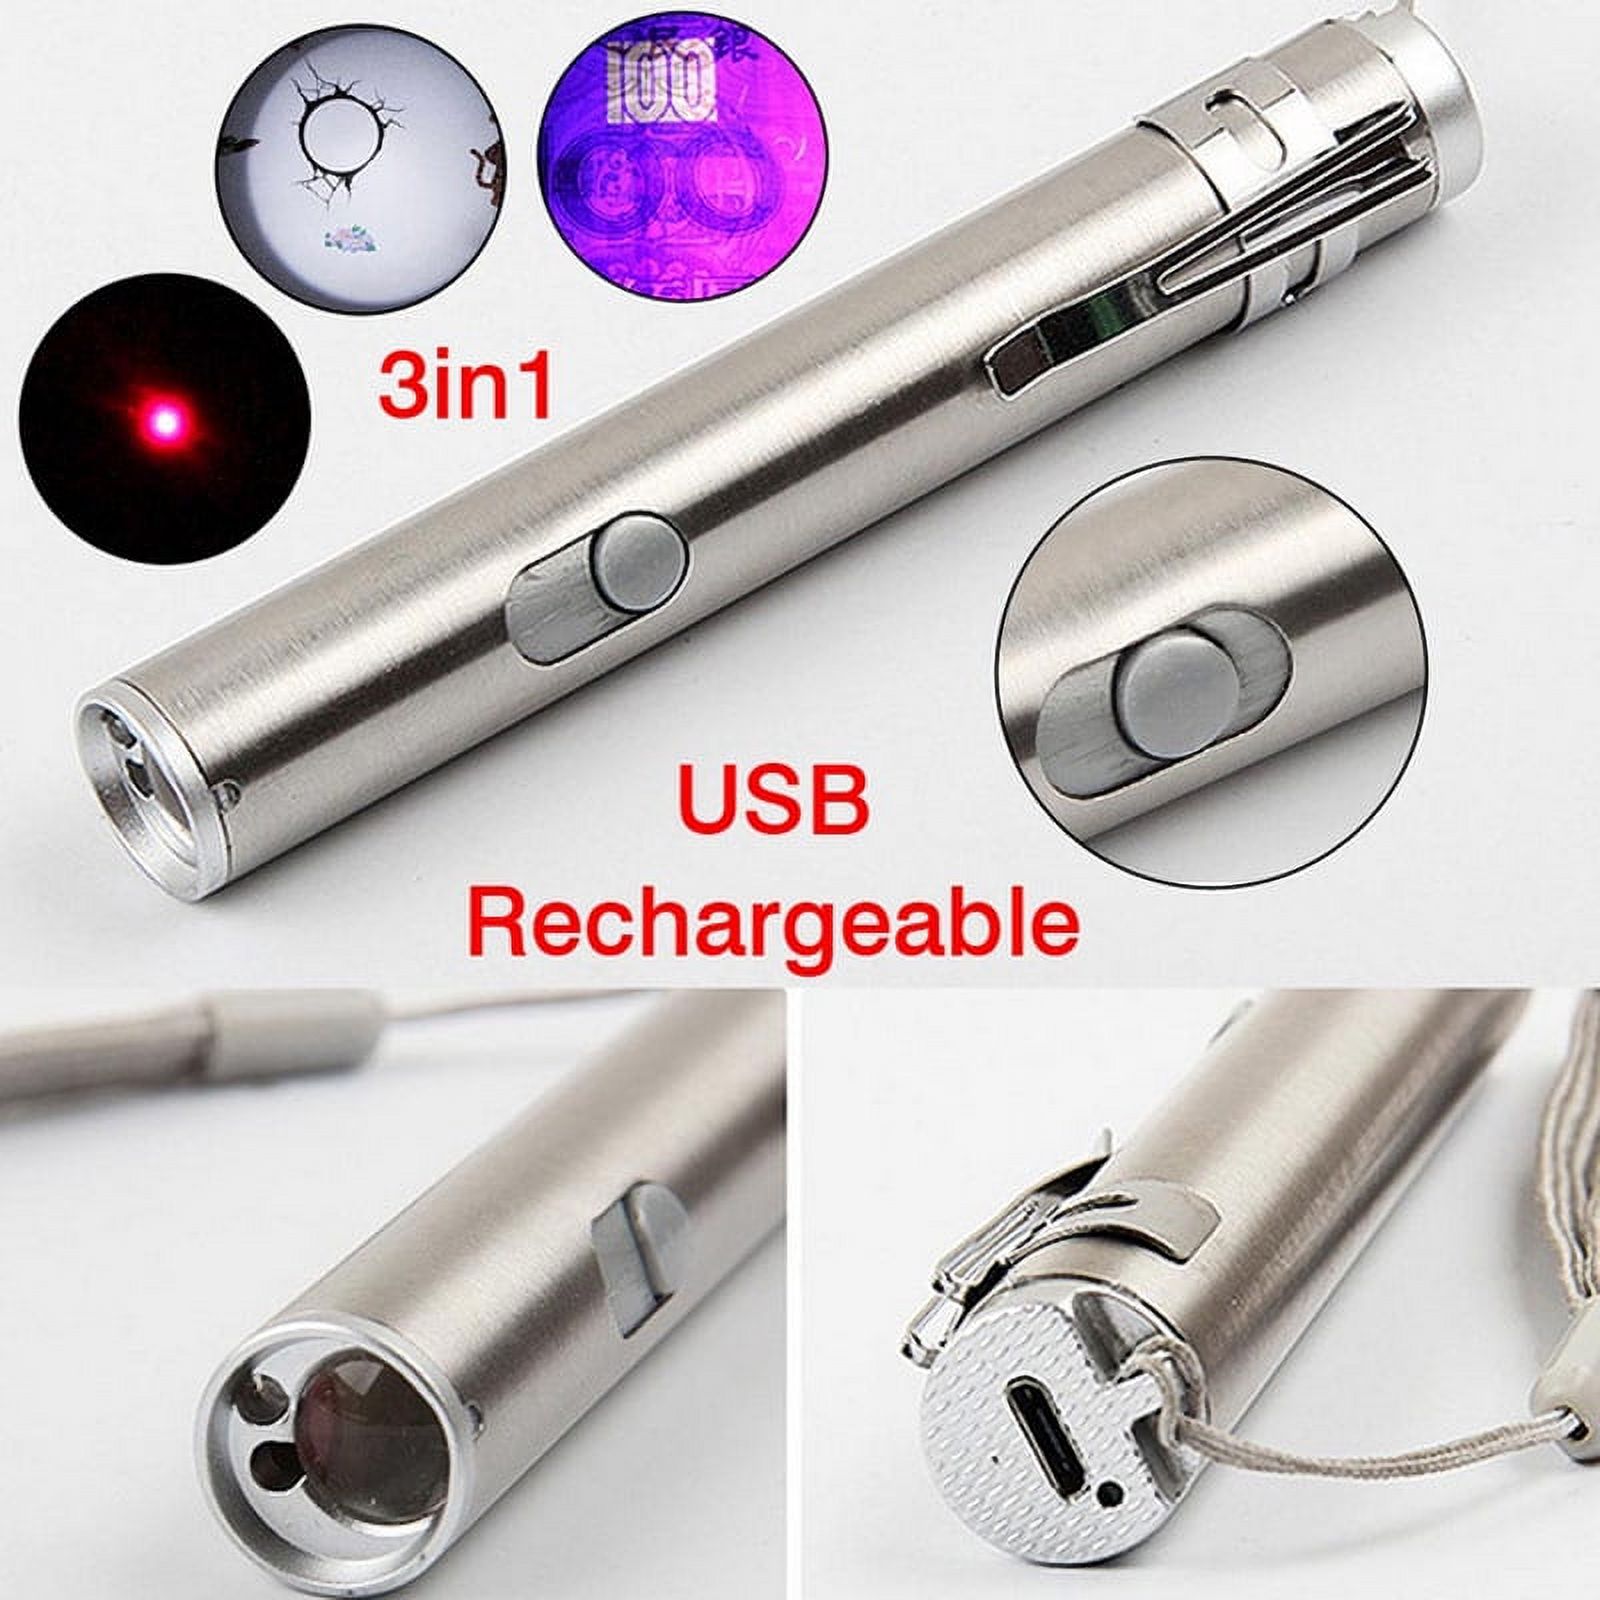 New 3 in1 Mini USB Rechargeable LED Laser UV Torch Pen Flashlight Multifunction Lamp - image 1 of 8